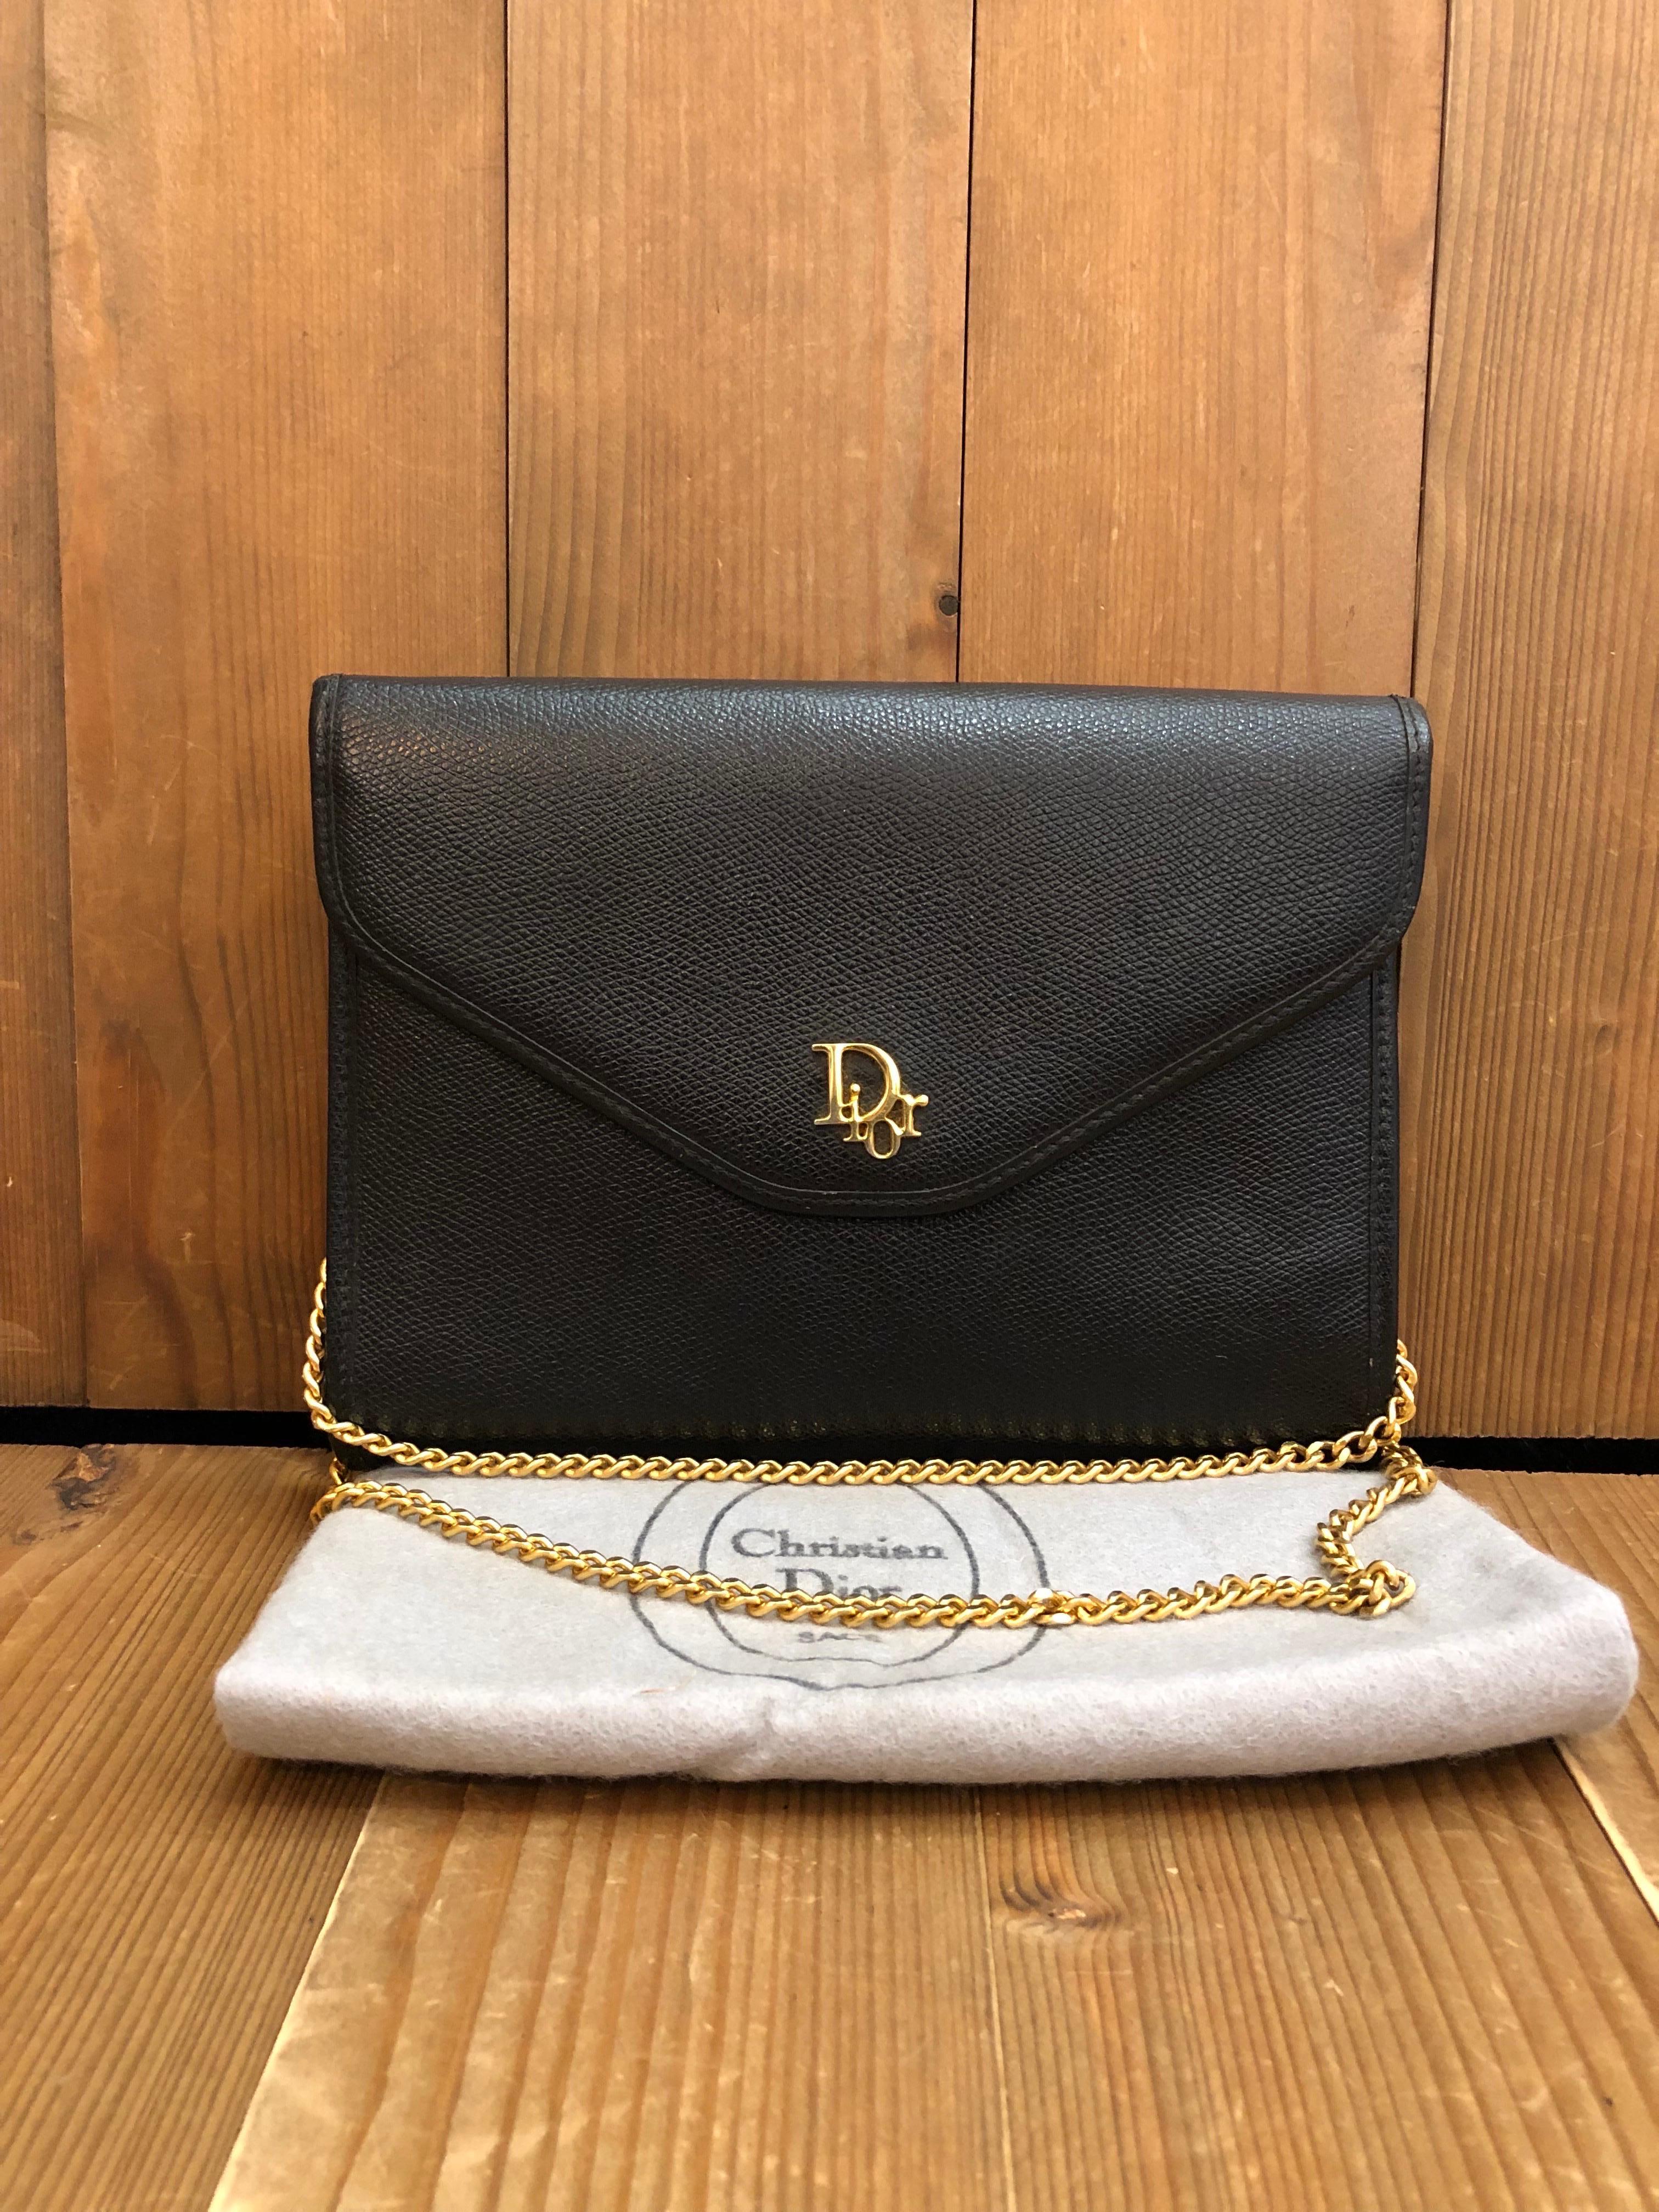 This vintage CHRISTIAN DIOR shoulder bag is crafted of grain-textured leather in black. This vintage Dior features a gold toned chain that lets you carry it single and double chained or as a clutch. Front flap closure with snap fastening opens to a